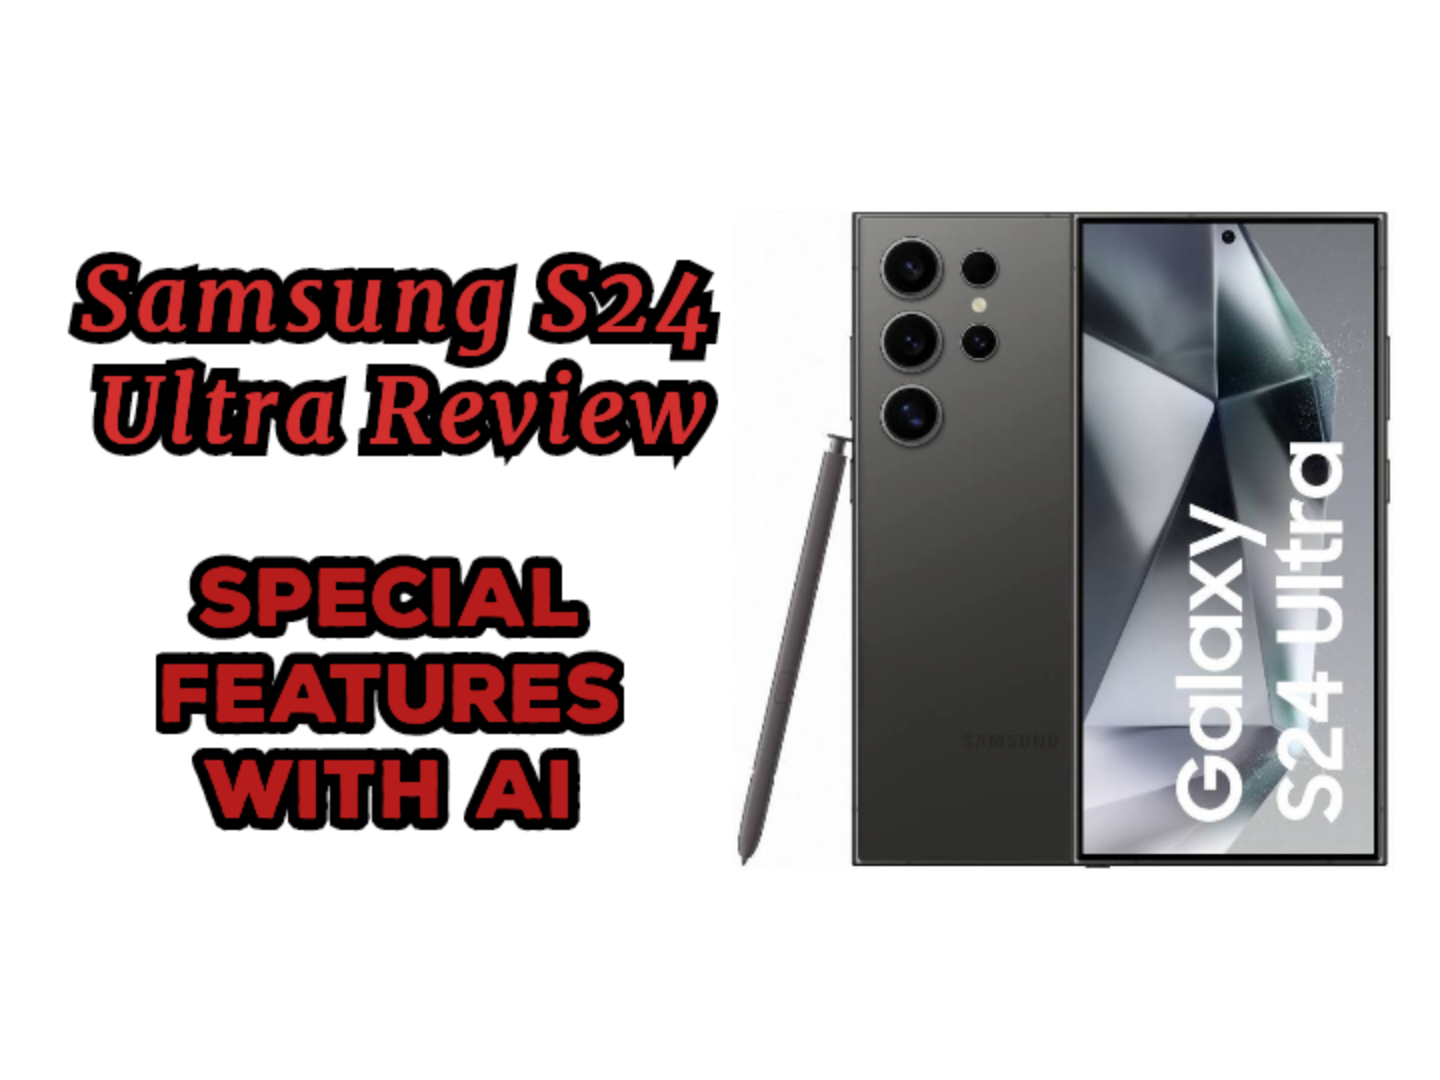 Samsung S24 Ultra review